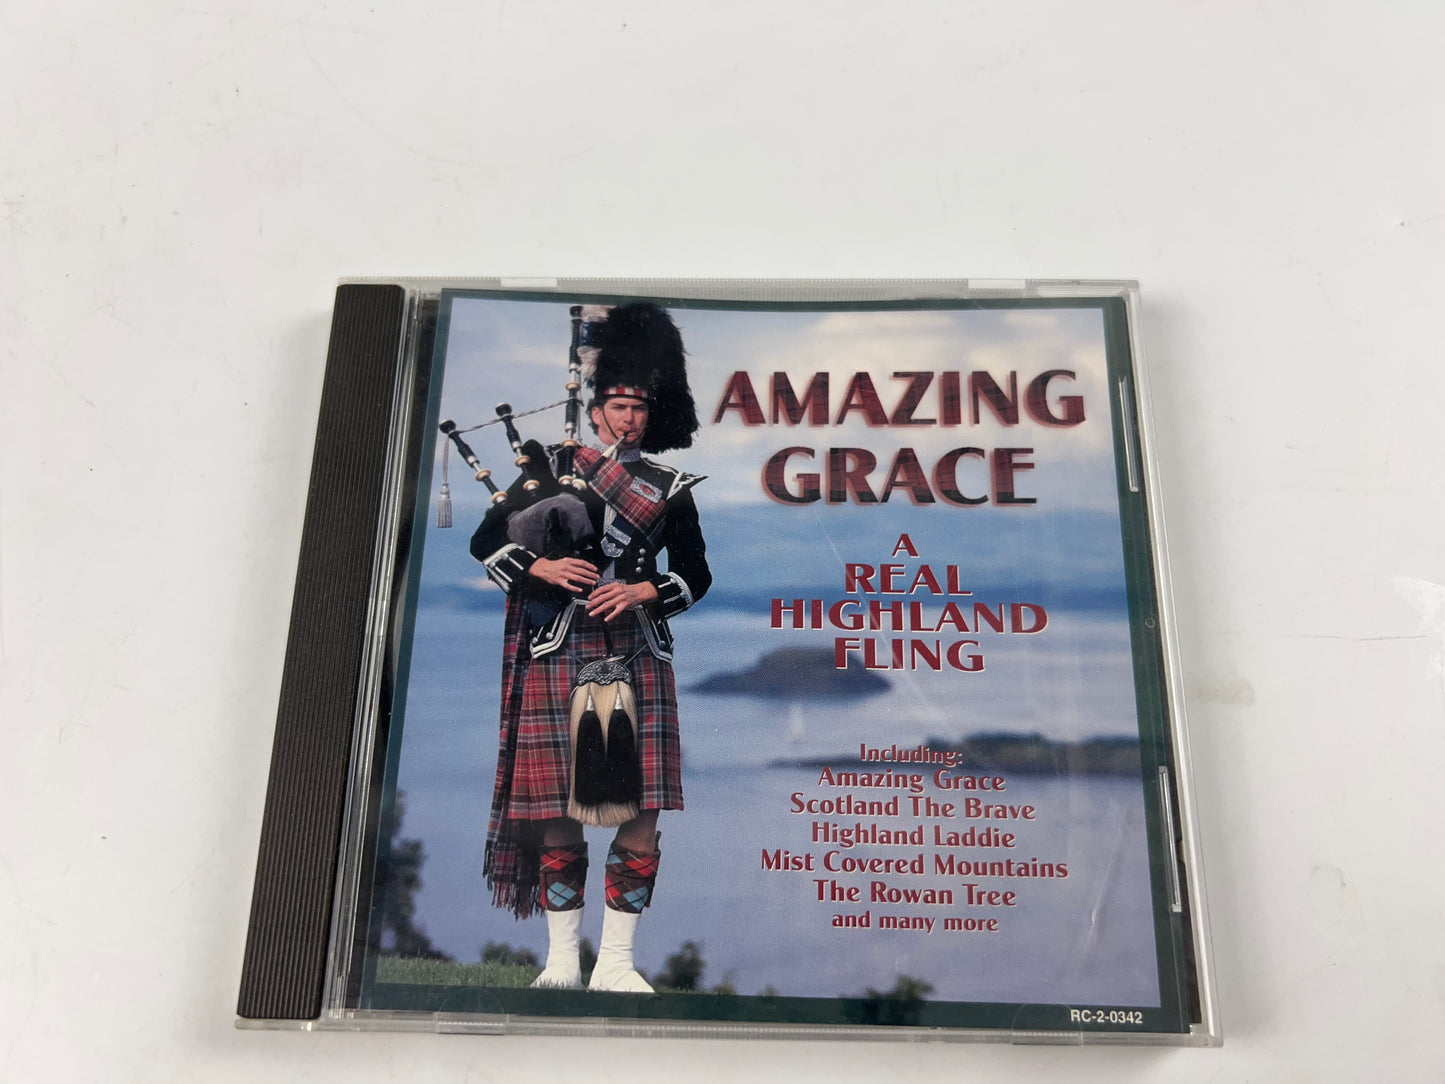 Amazing Grace: A Real Highland Fling - Music CD - Various Artists